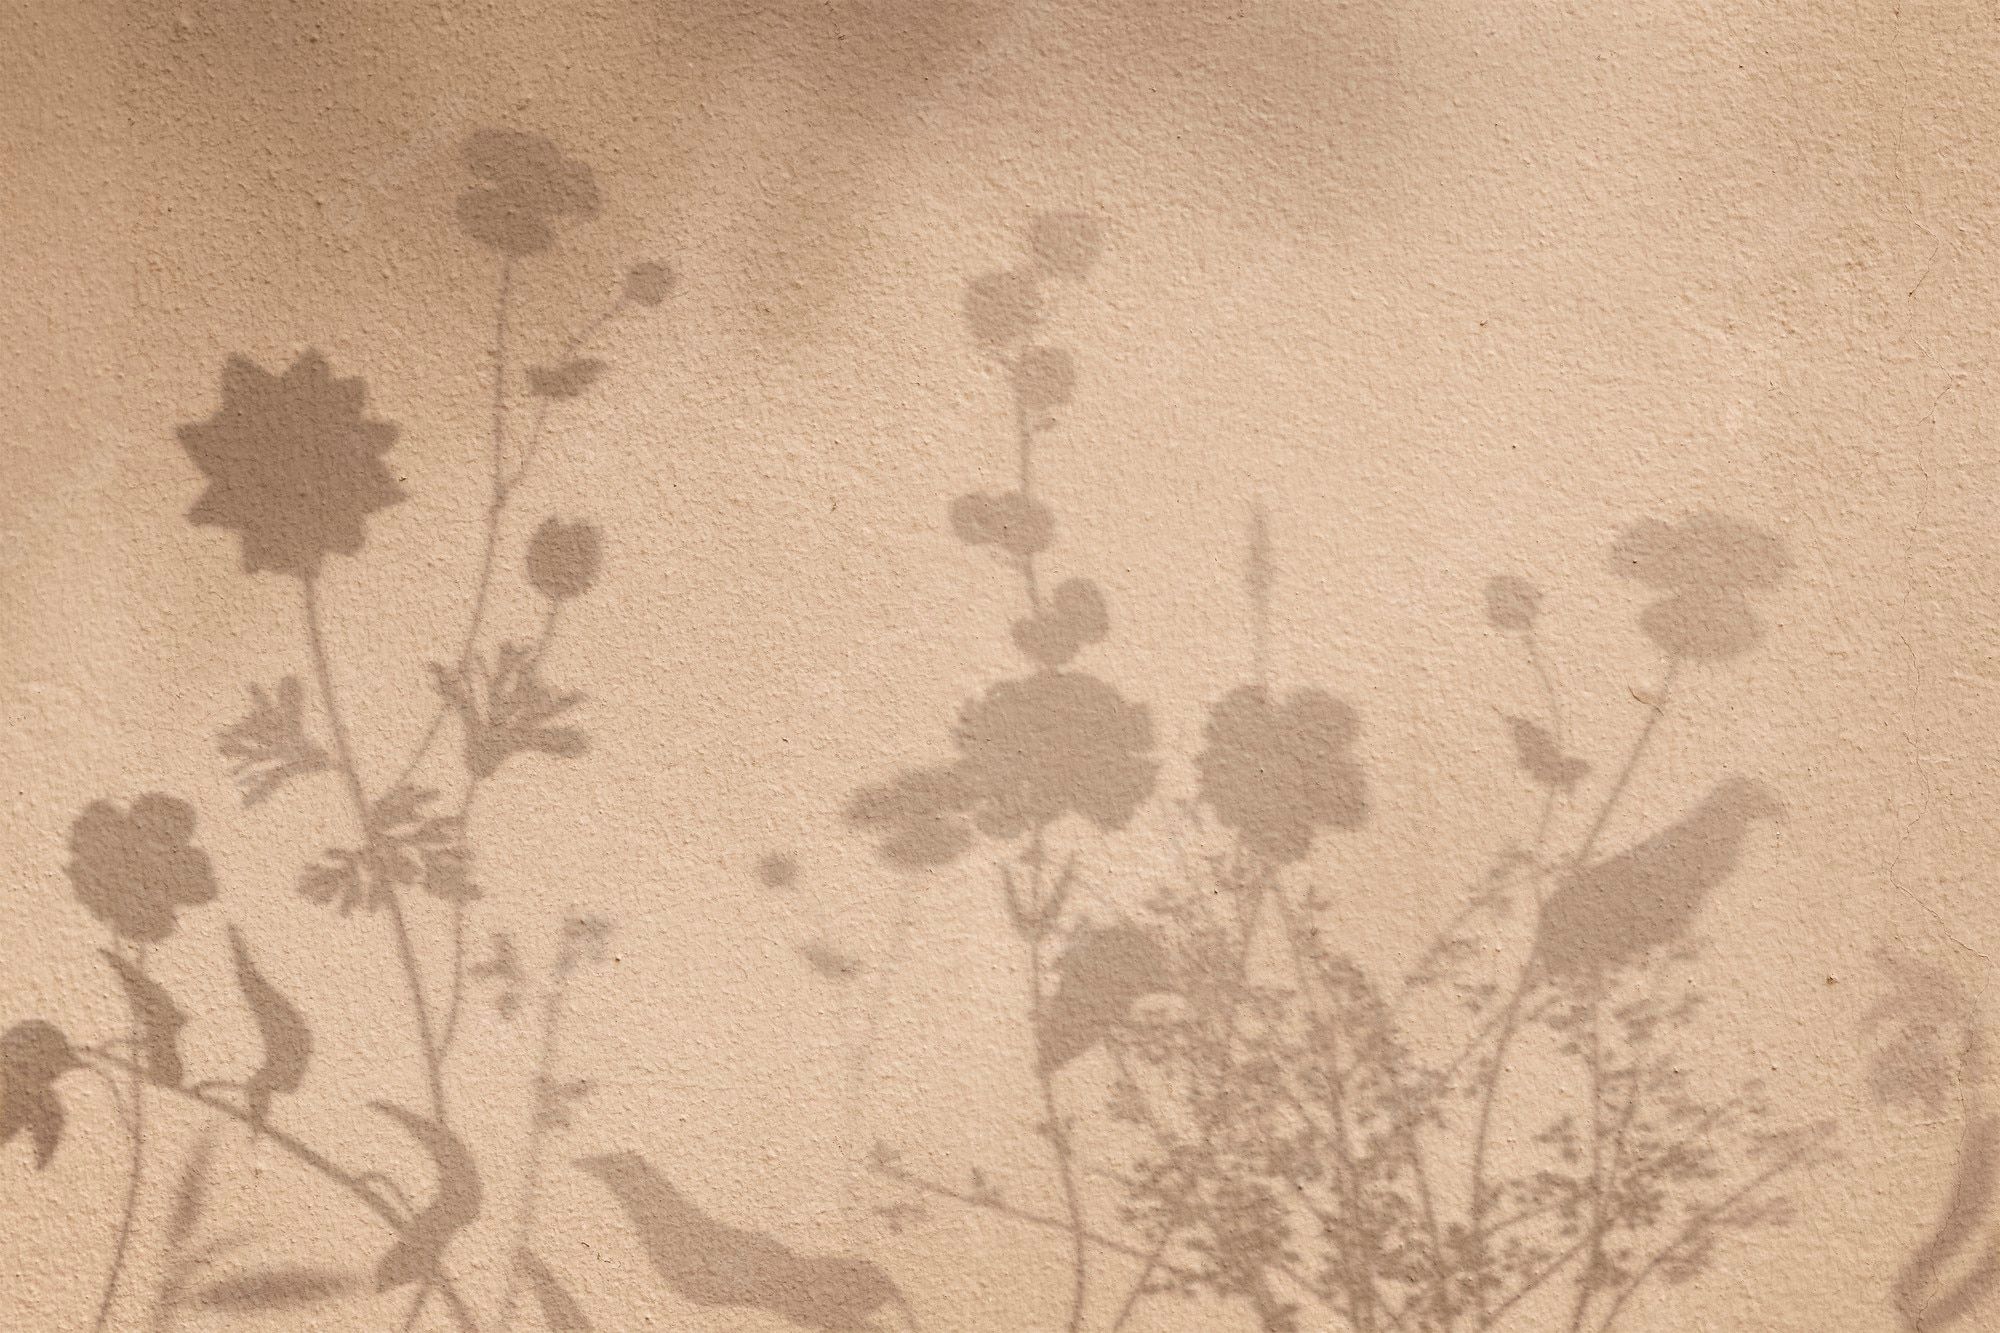 A shadow of flowers and birds on the wall - Art, beige, vintage, photography